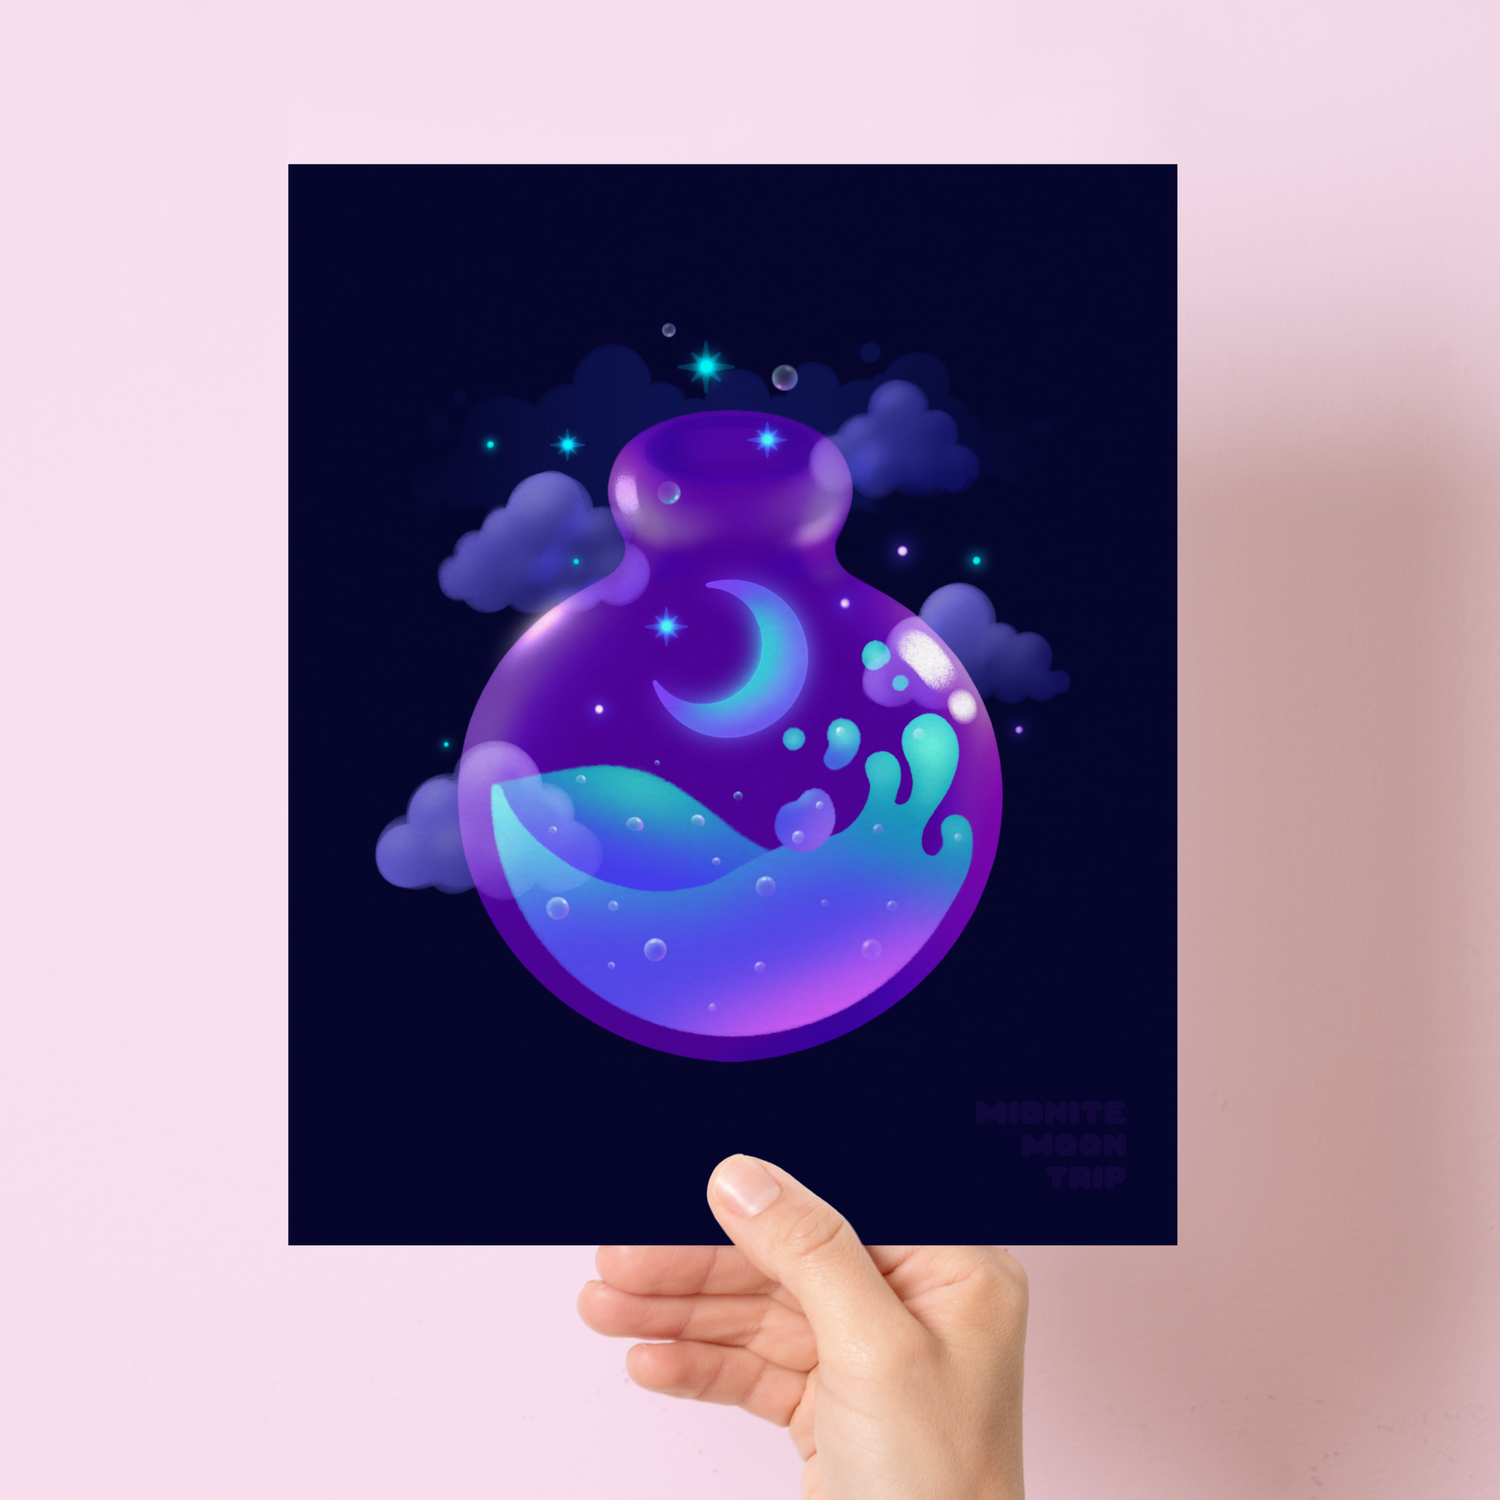 art print with an illustration of a magic potion bottle with a crescent moon and stars